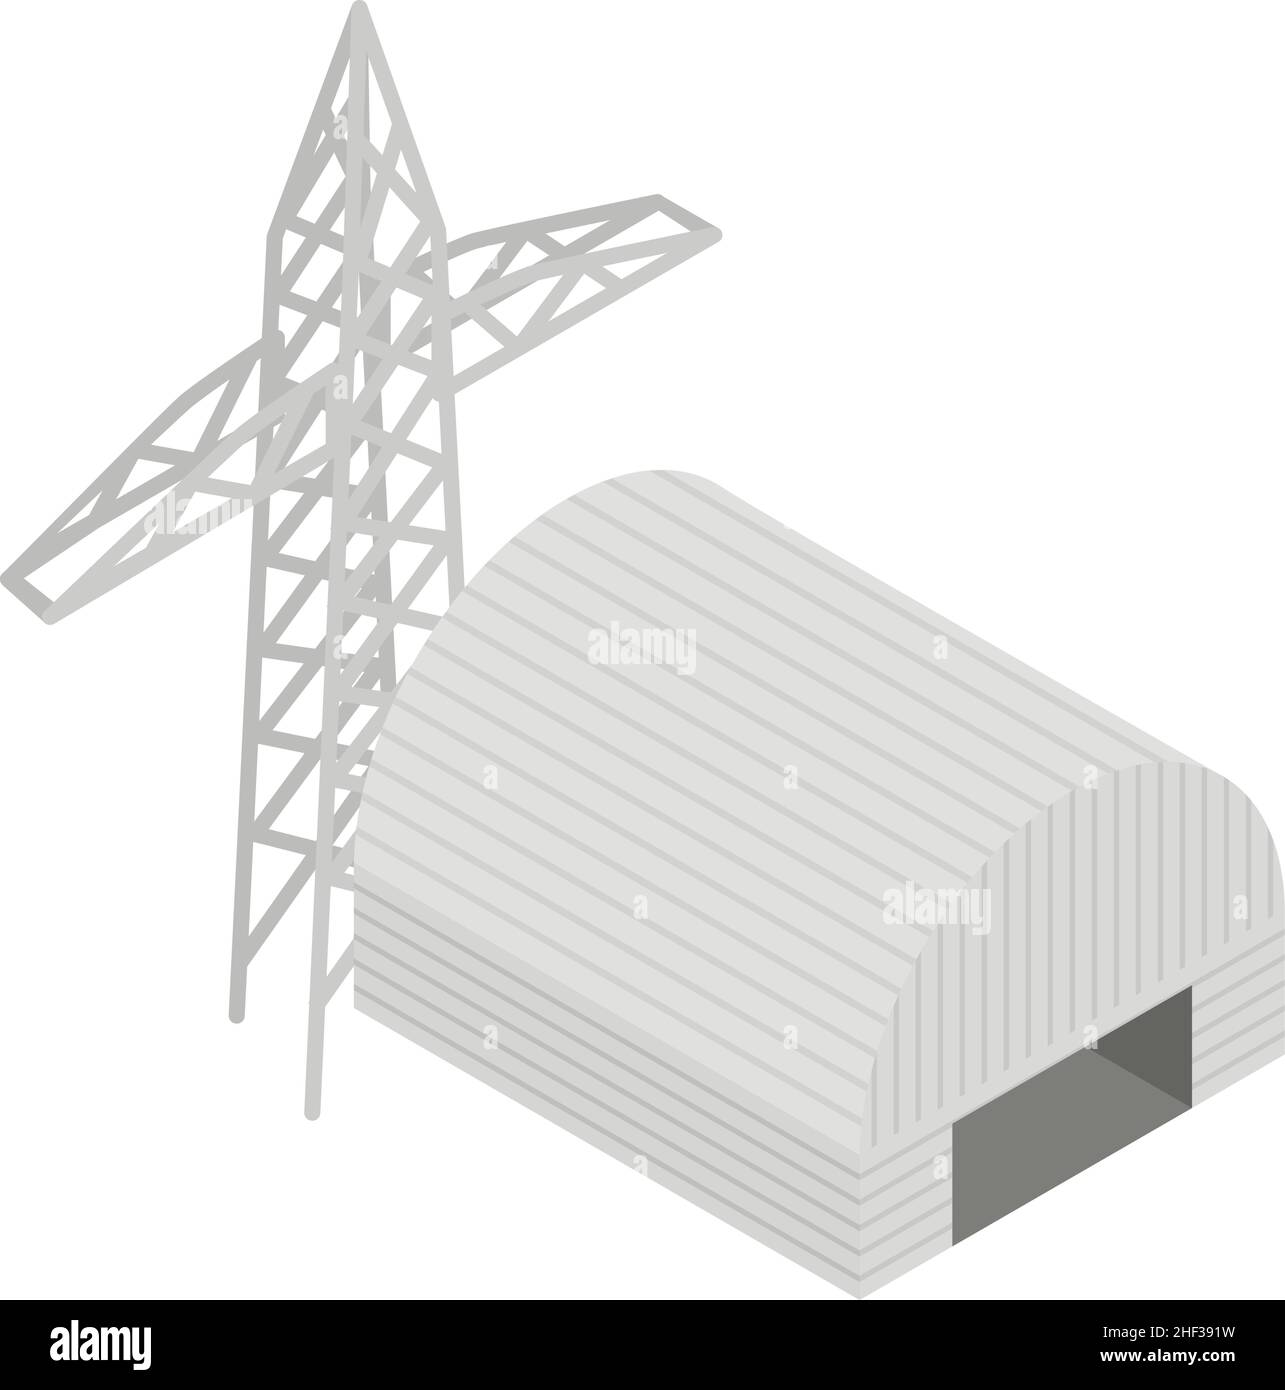 Power transmission icon isometric vector. Power line pylon and hangar building. Electric pole, distribution energy, electrification Stock Vector